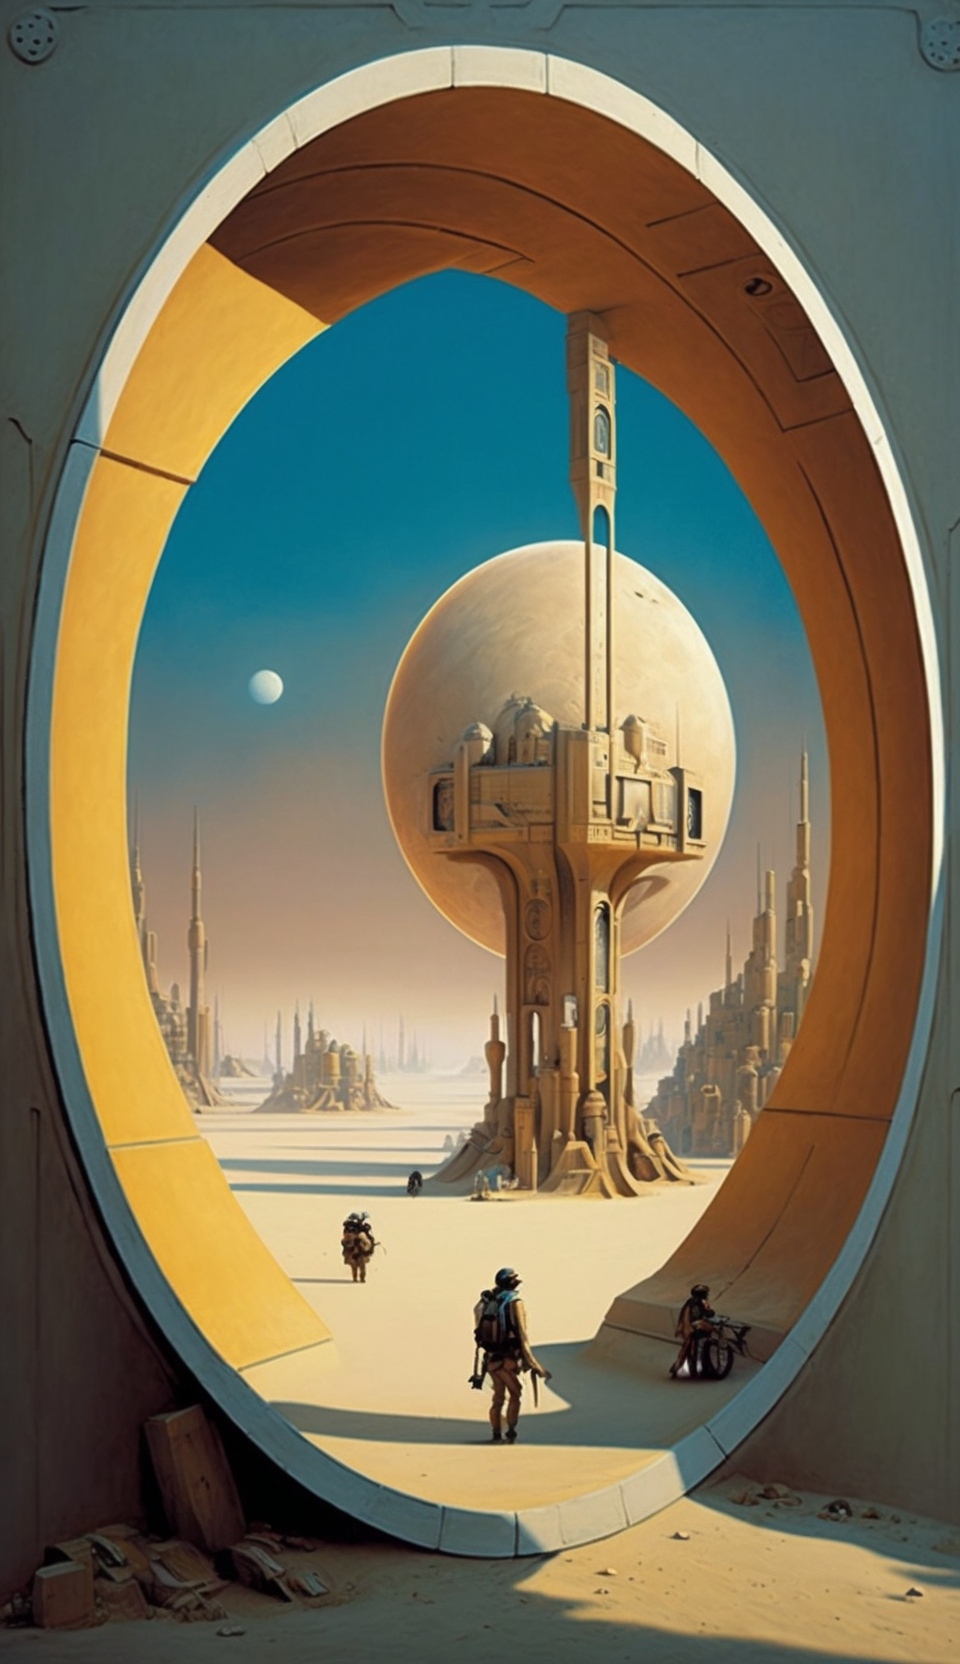 soupcan13_circle_in_the_style_of_Ralph_McQuarrie_727aeff9-3351-479e-8a6b-776017761aeb.png